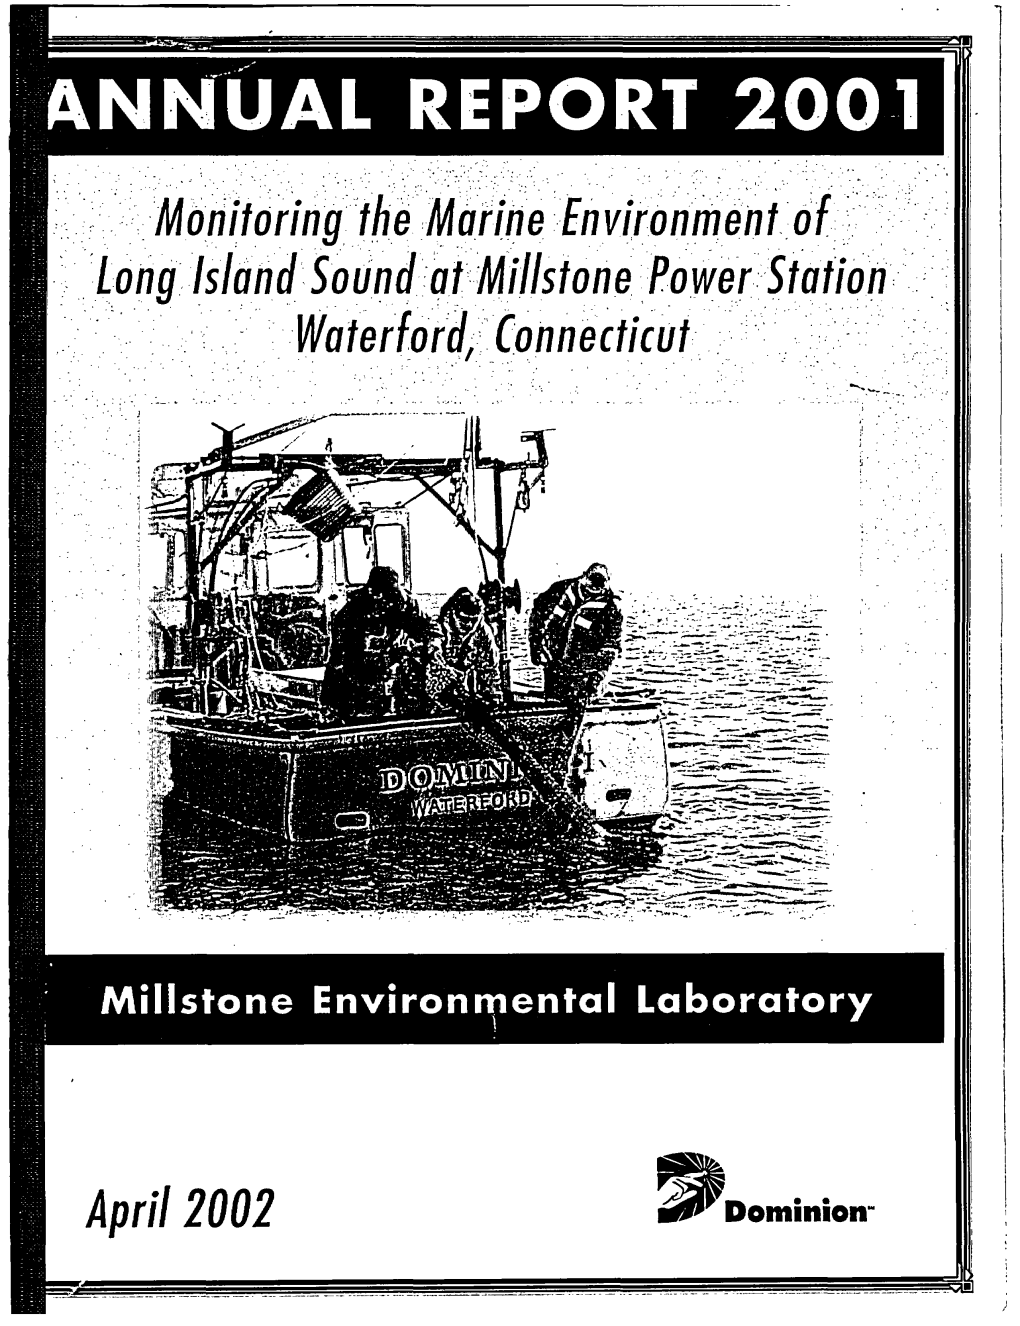 Monitoring the Marine Environment of Long Island Sound at Millstone Power Station, Waterford, Connecticut, Annua